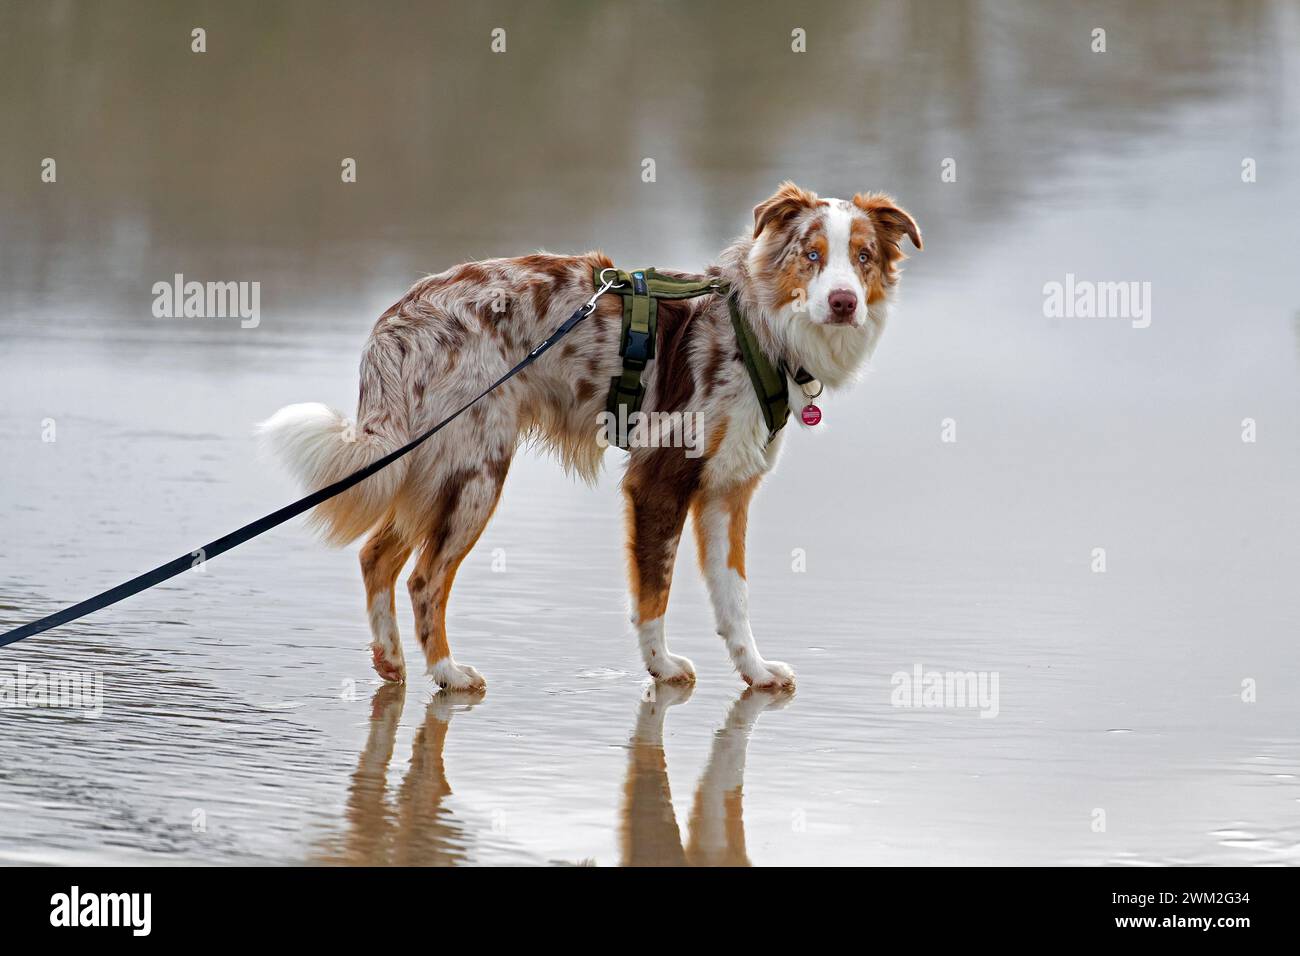 Australian Shepherd / Aussie, breed of herding dog from the United States, walking on leash on the beach Stock Photo